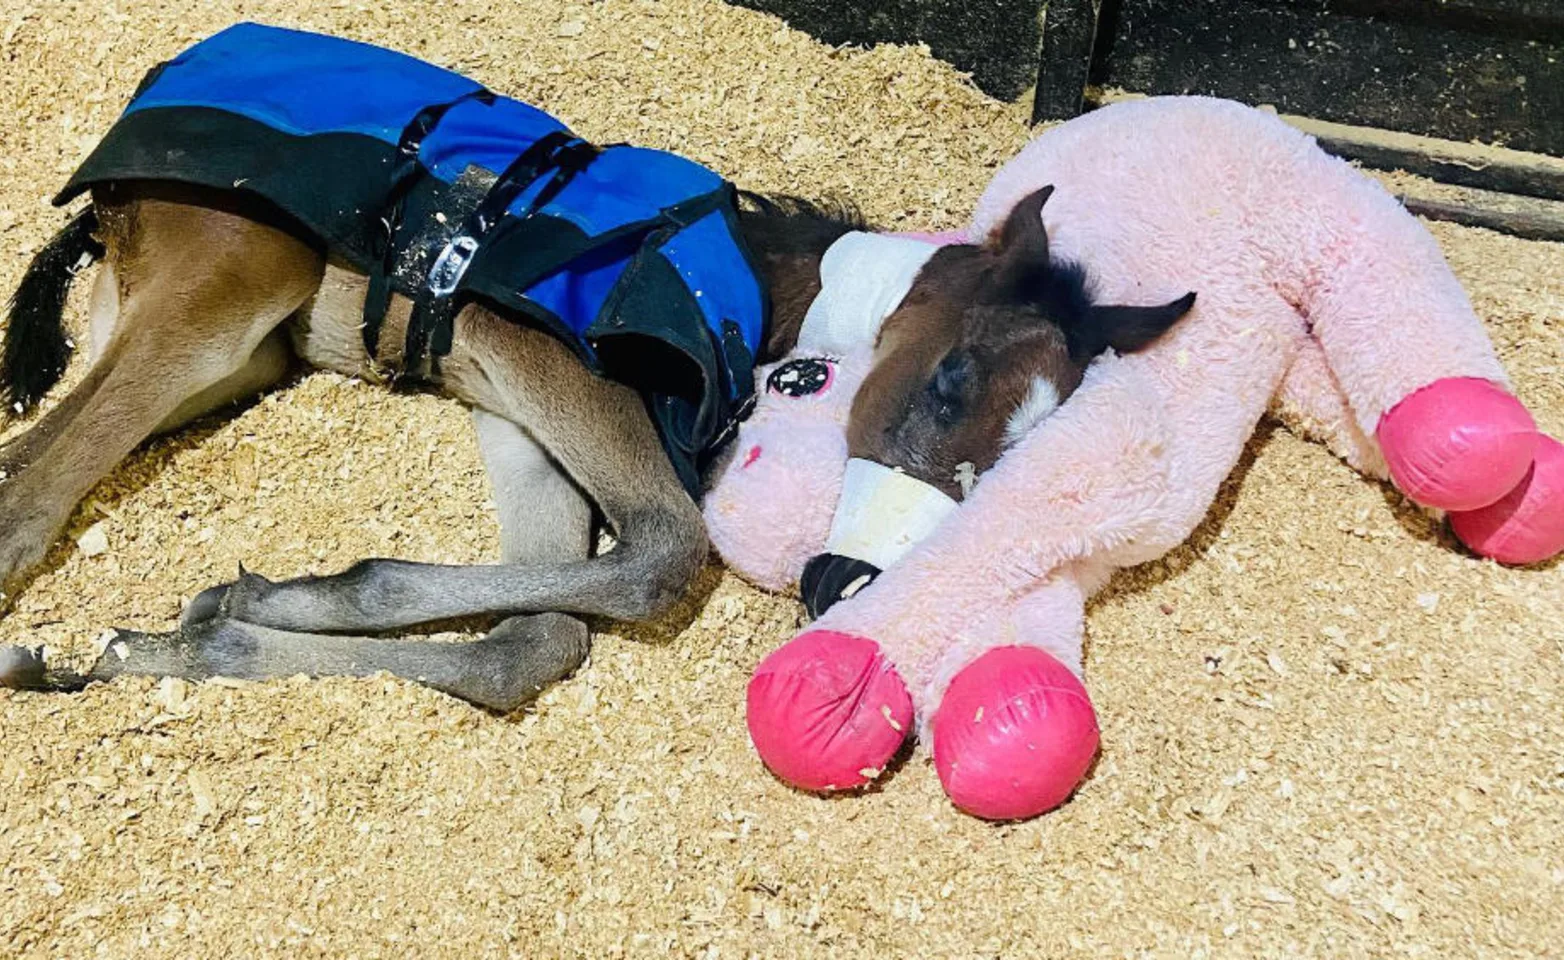 Foal with a blue vest on laying down cuddling a stuffed pink unicorn